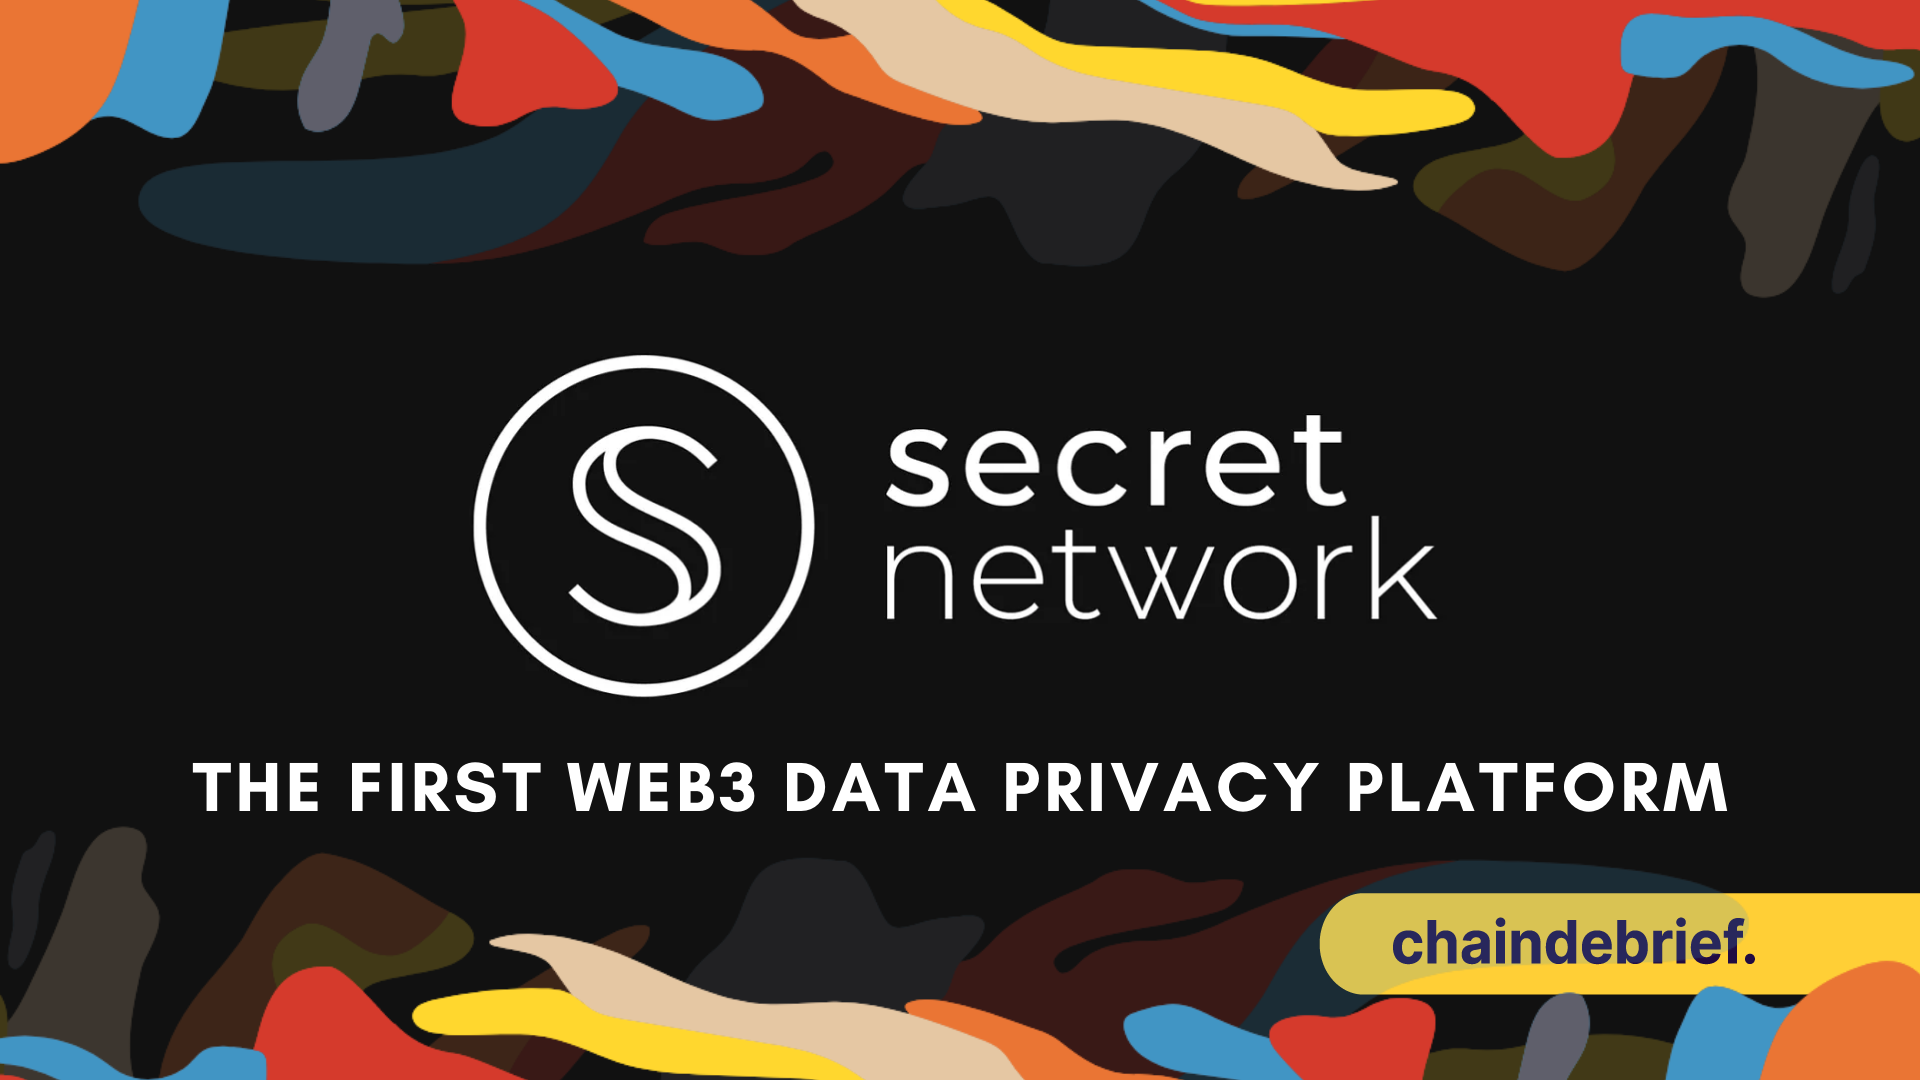 The first web3 data privacy platform